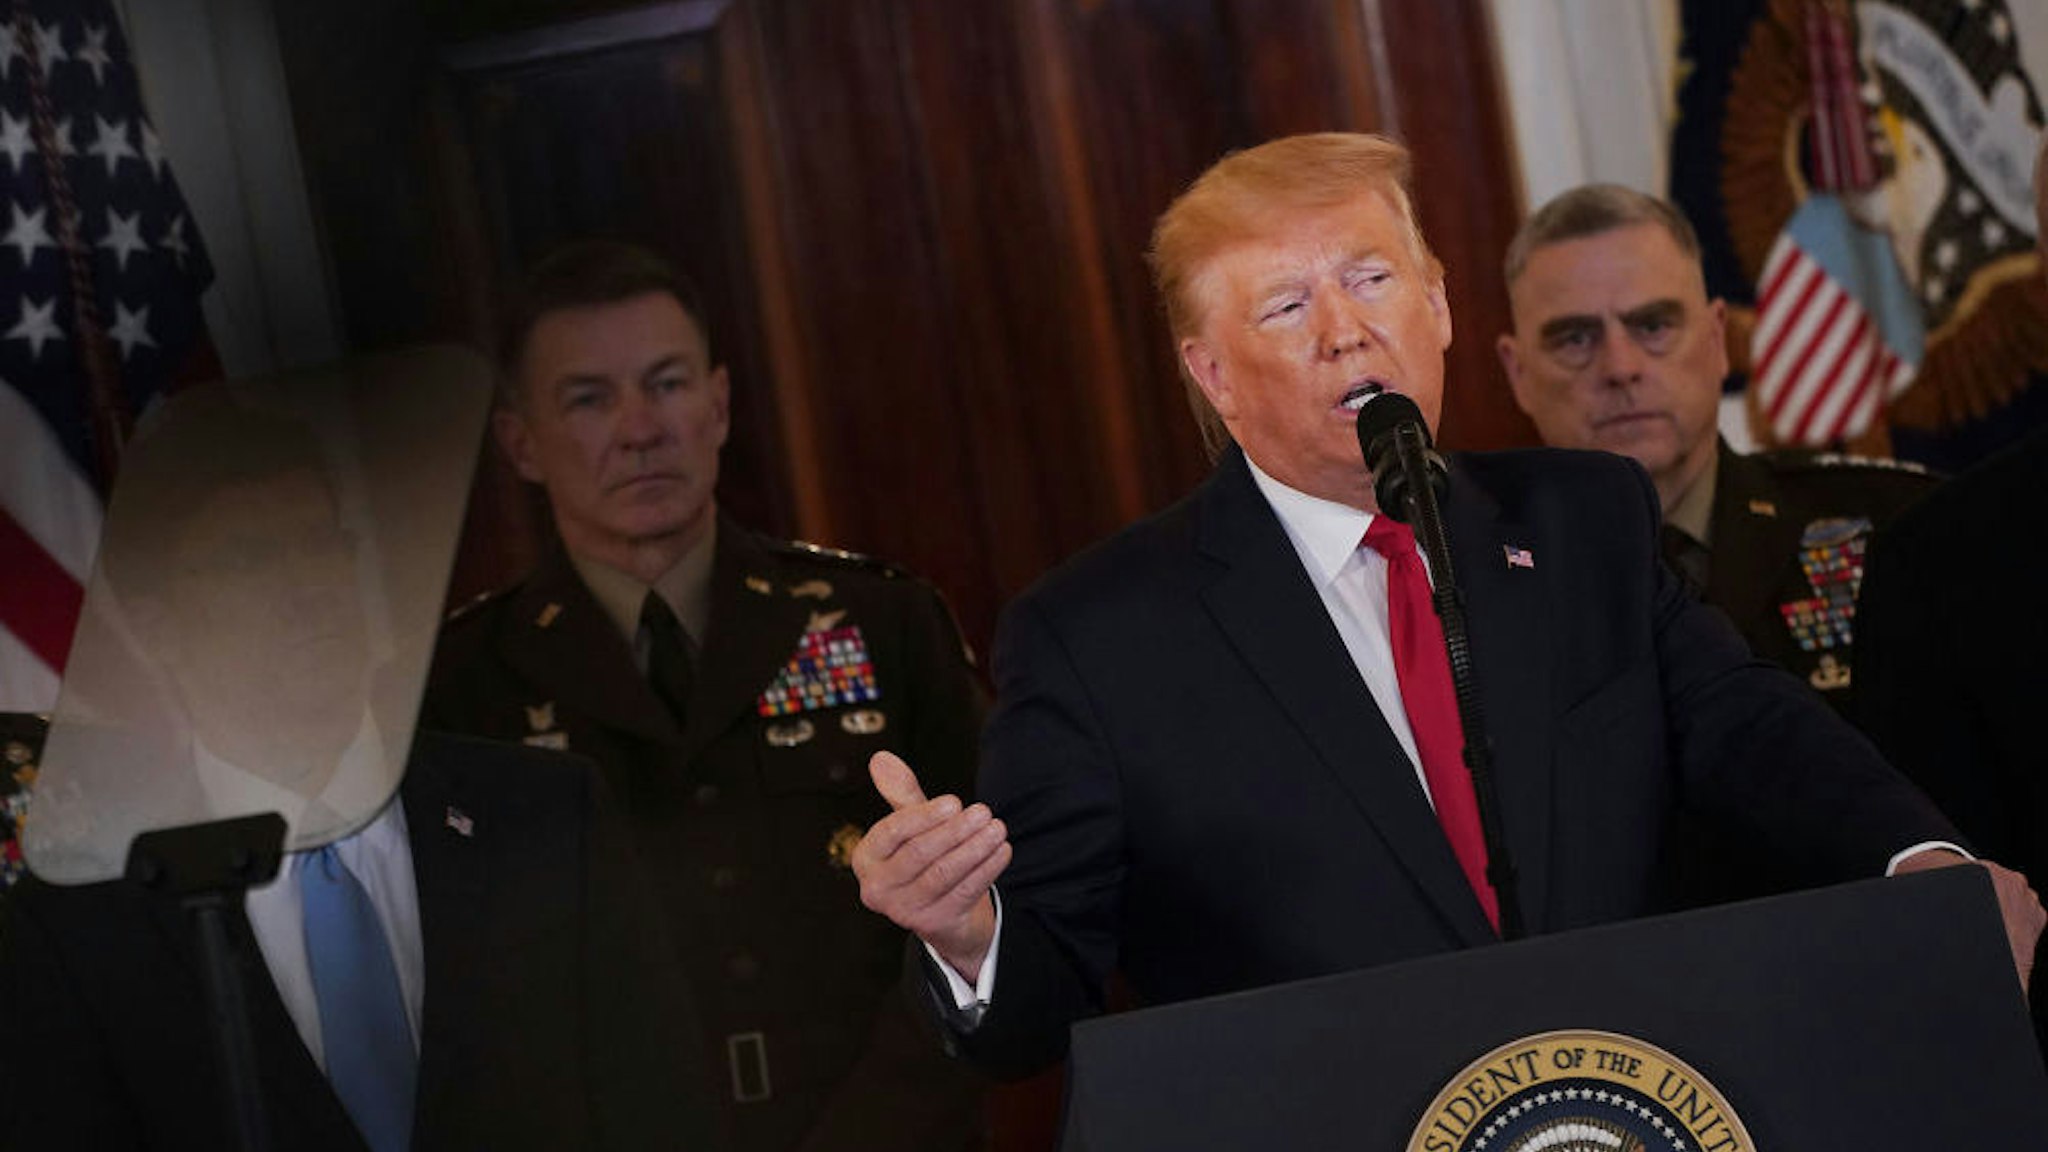 U.S. President Donald Trump speaks in the Grand Foyer of the White House in Washington, D.C., U.S., on Wednesday, Jan. 8, 2020. Iran apparently intended to avoid U.S. casualties when it launched more than a dozen missiles at U.S.-Iraqi airbases in retaliation for an American airstrike that killed a top Iranian general, according to U.S. officials with knowledge of the matter. Photographer: Andrew Harrer/Bloomberg